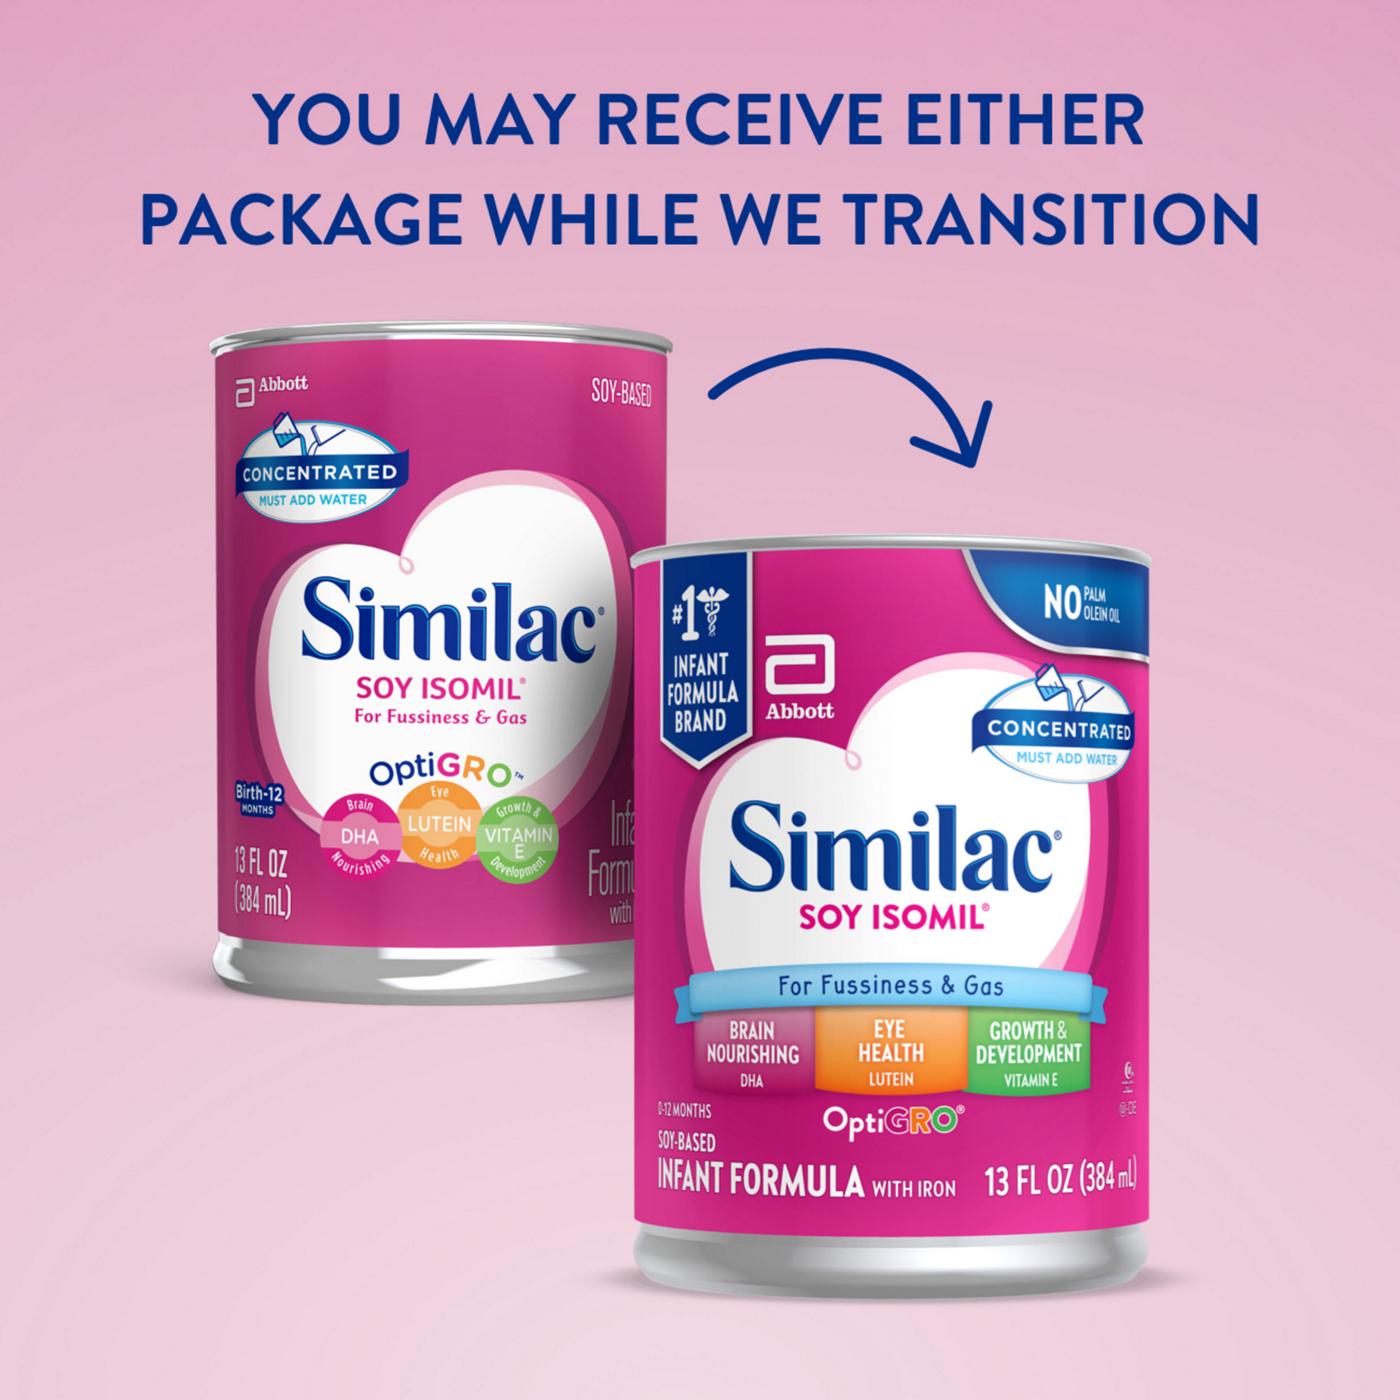 Similac Soy Isomil For Fussiness and Gas Infant Formula with Iron Concentrated Liquid; image 2 of 6